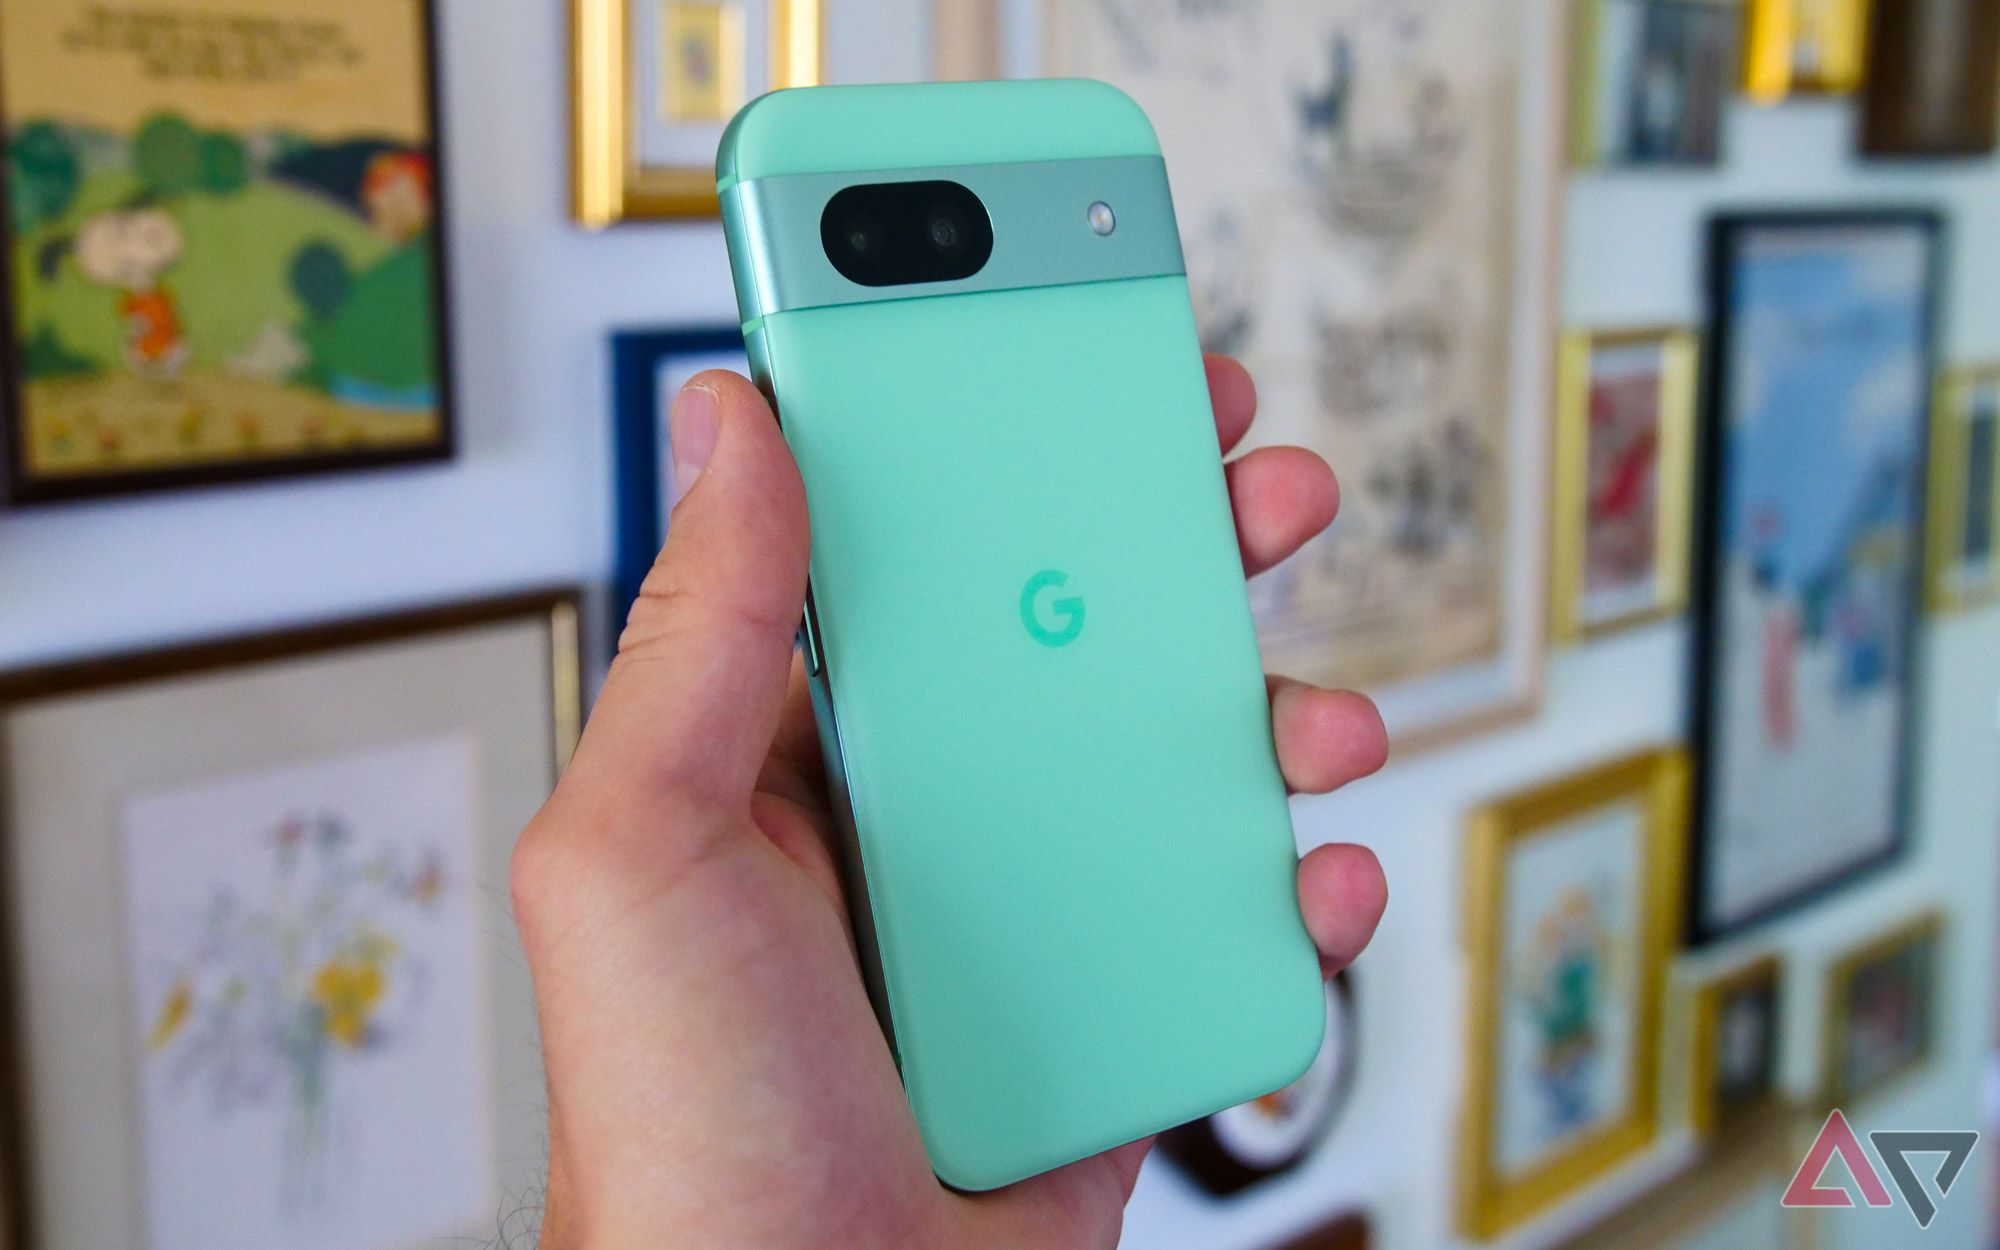 The Google Pixel 8a held in a hand with photos hung on the wall behind it.